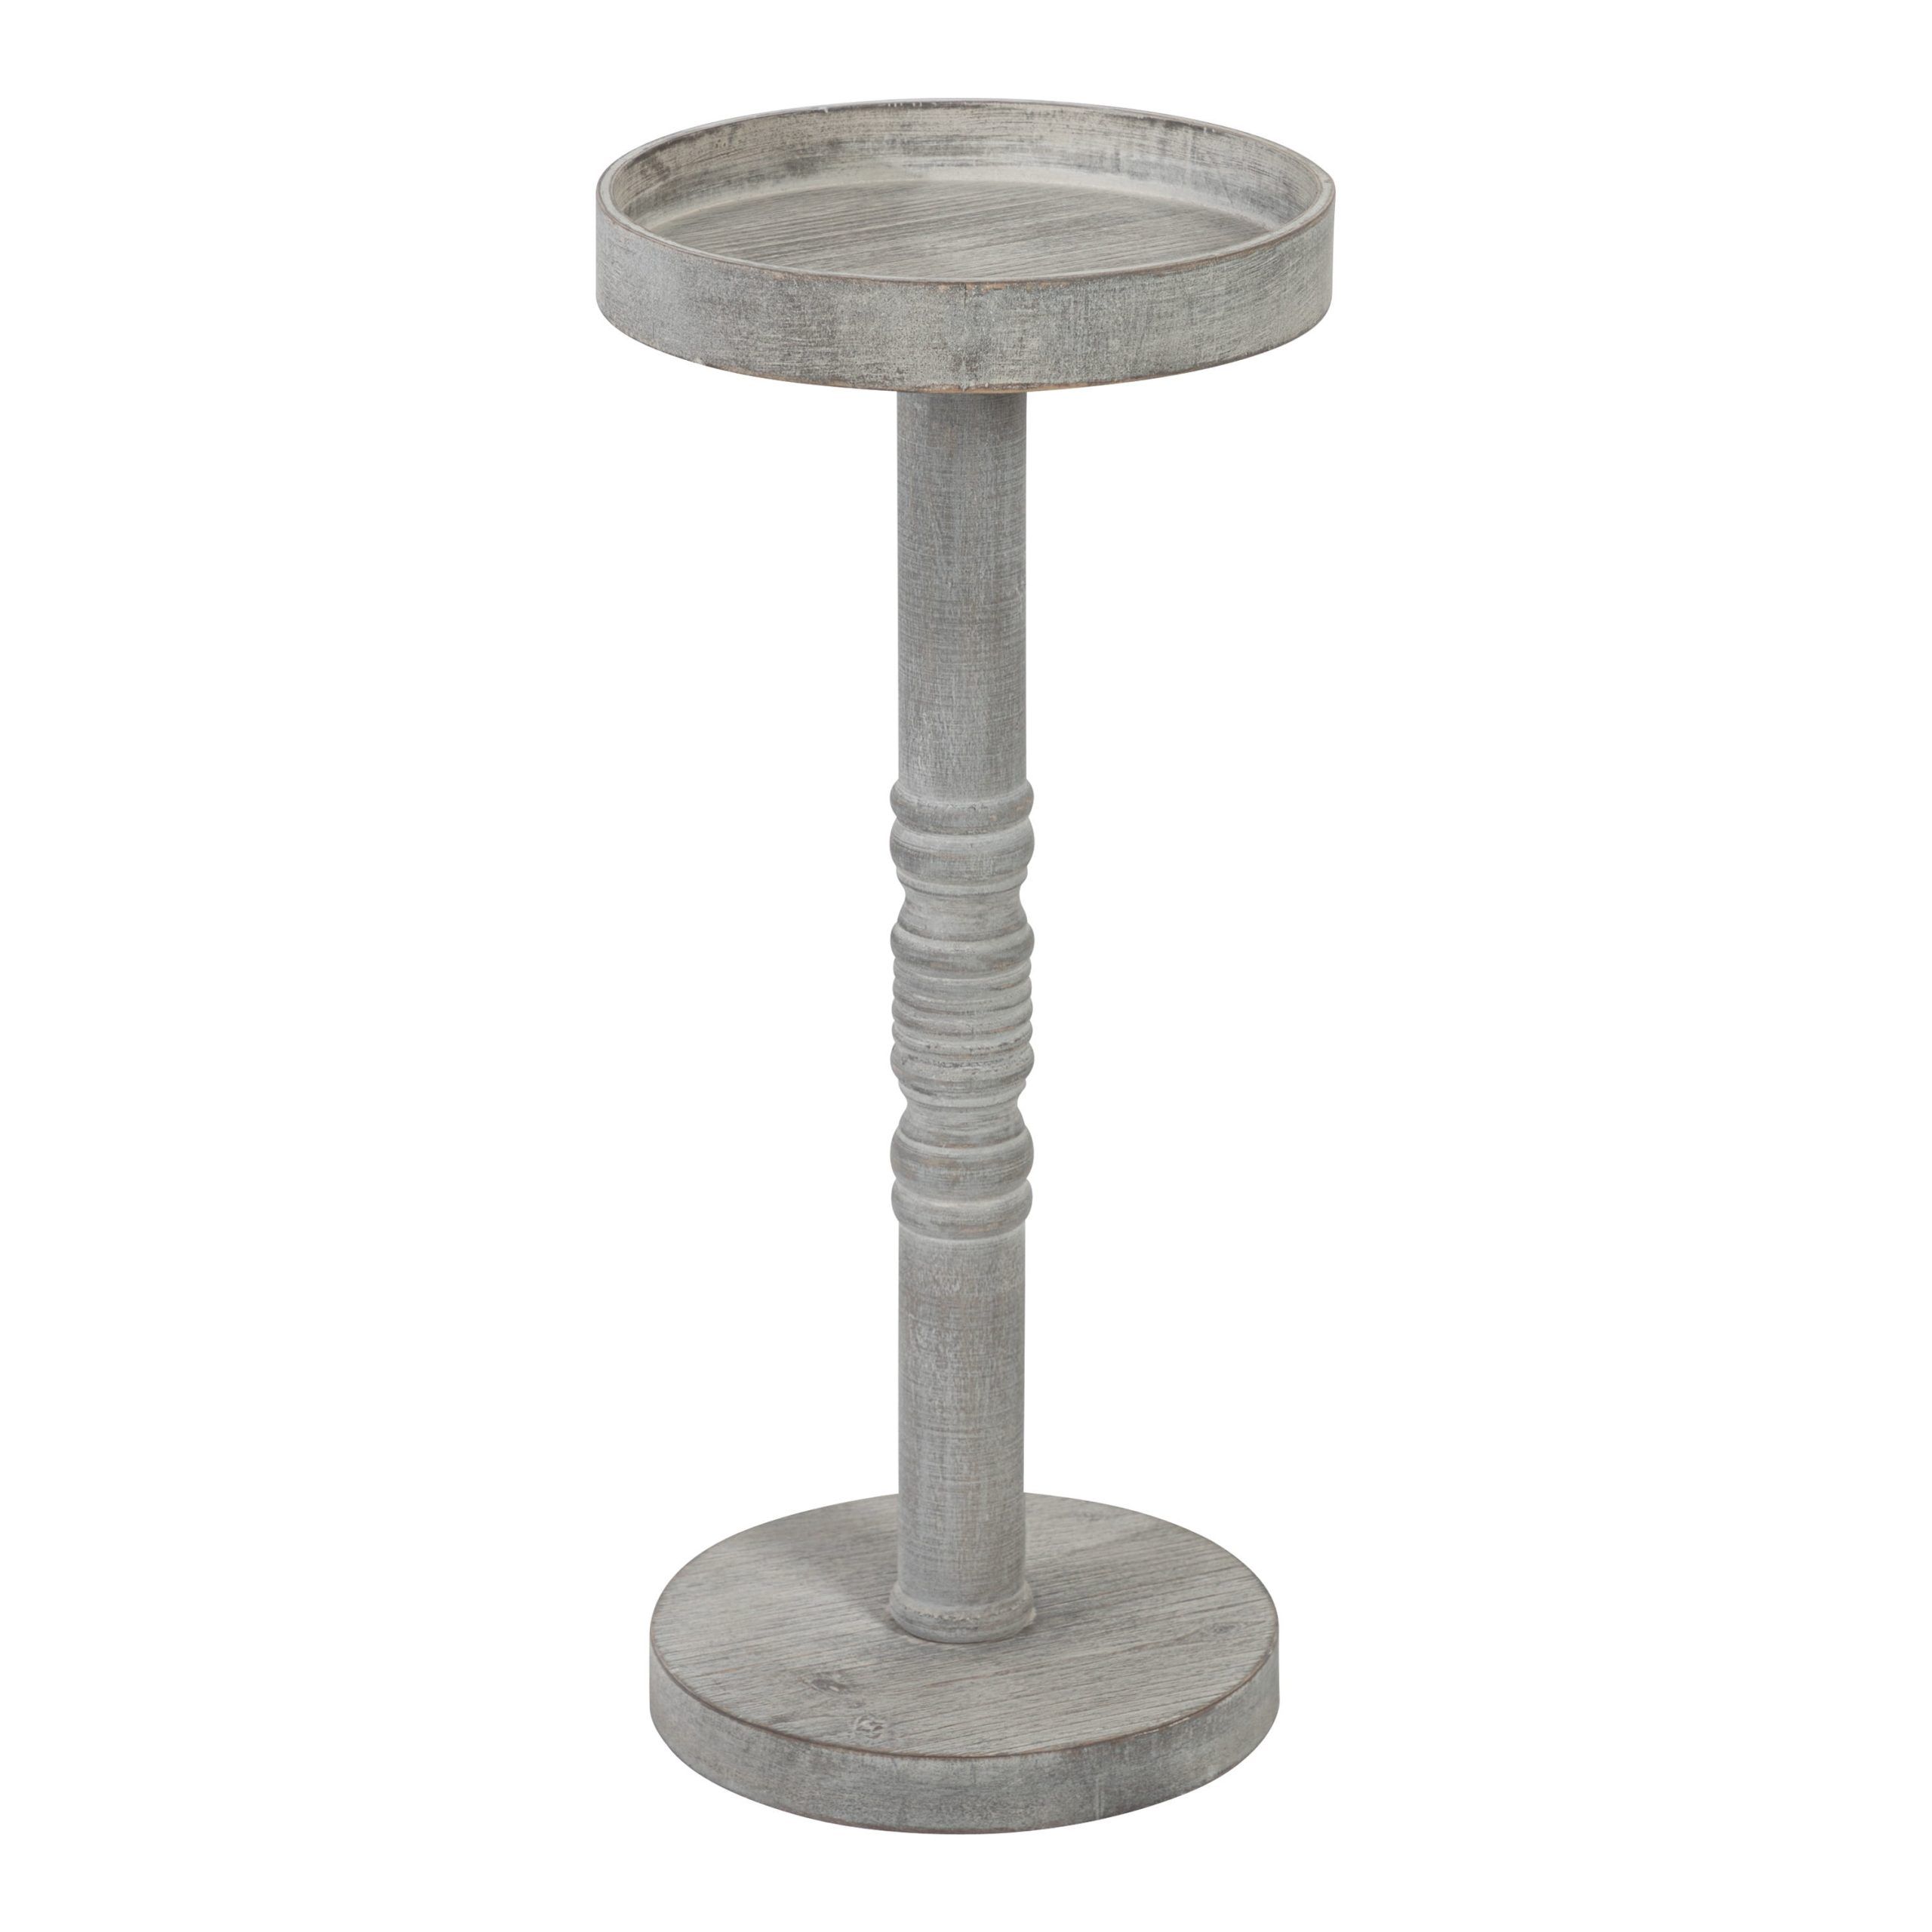 Kate And Laurel Bellport Farmhouse Drink Table, 10 X 10 X 22, Gray,  Decorative Coastal Cocktail Table With Round Tabletop And Colonial Base For  Farmhouse Decor – Walmart In Gray Coastal Cocktail Tables (View 12 of 15)